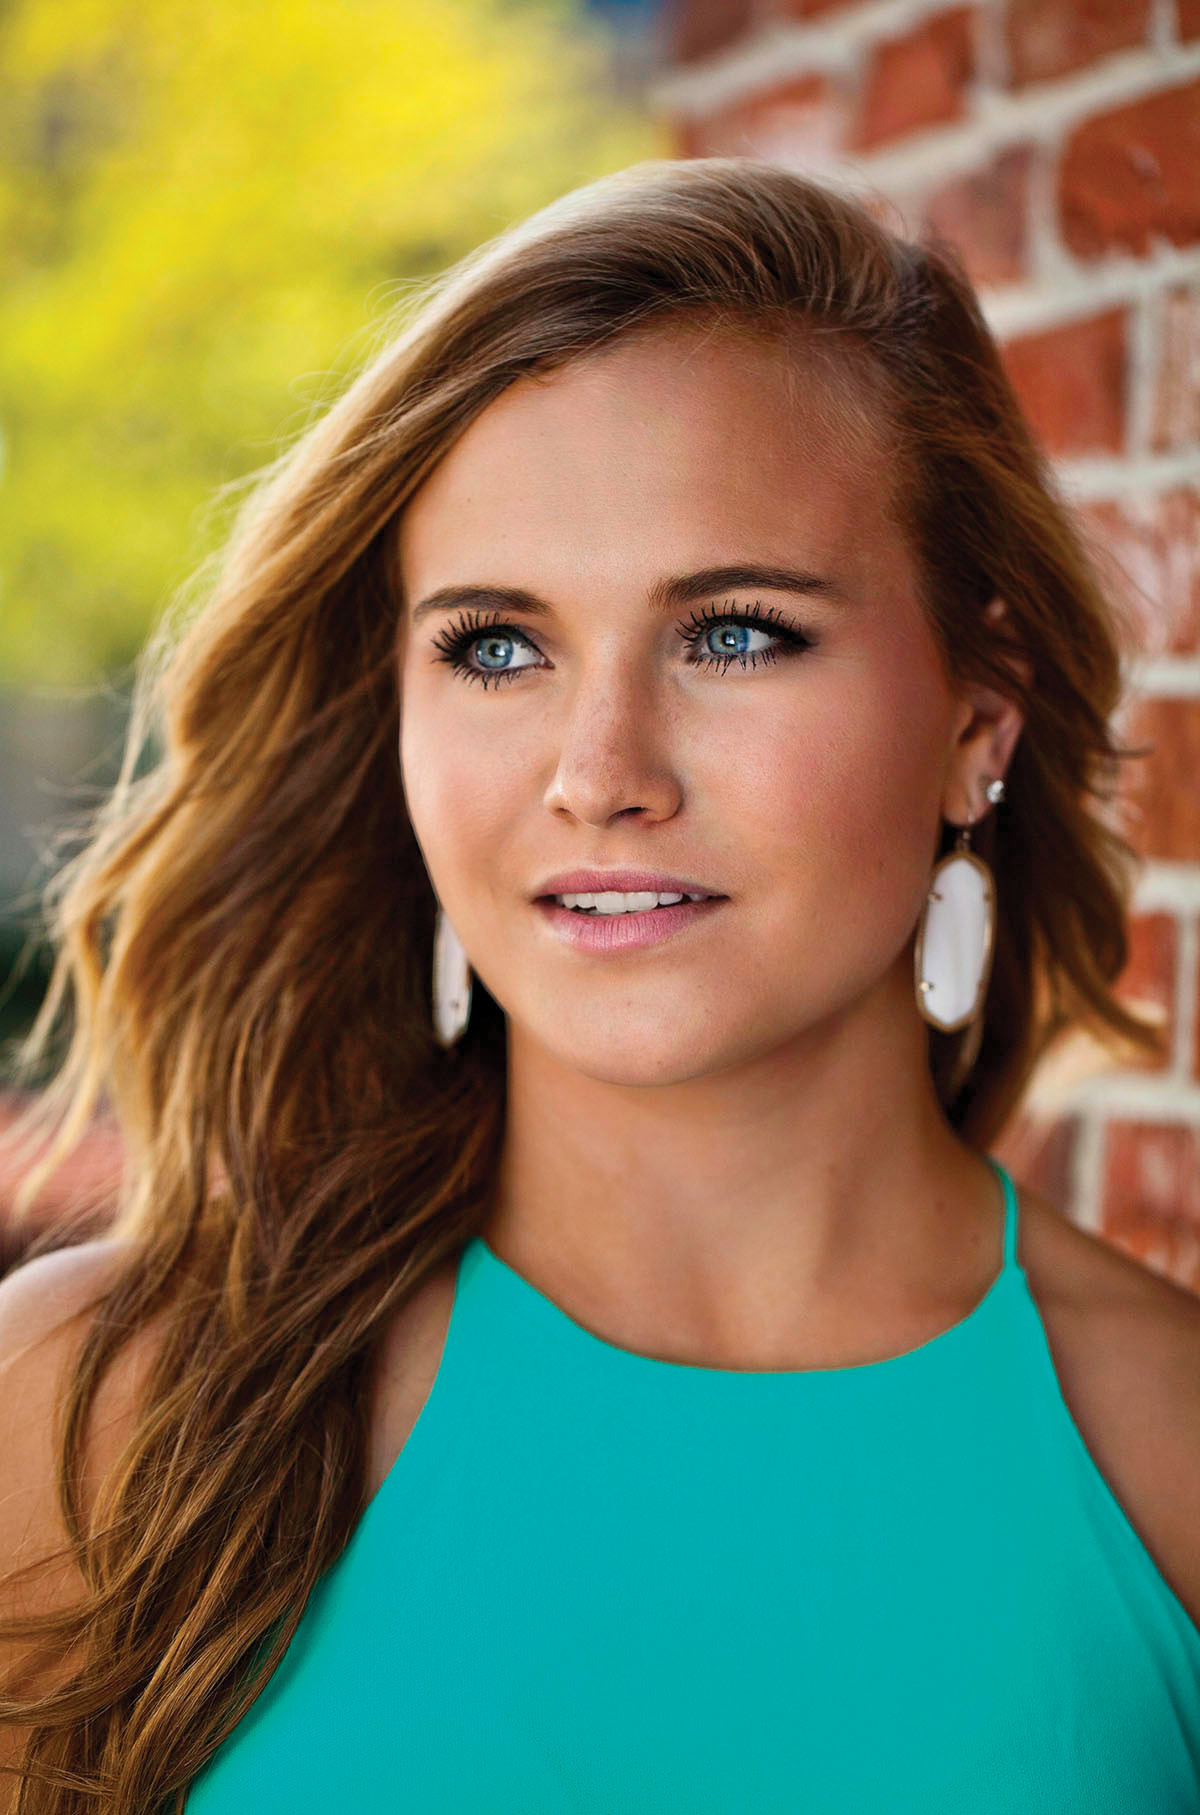 Photo of a high school senior girl wearing a teal top next to a brick wall taken by wedding photographers in Baltimore ARWhite Photography (Copy)